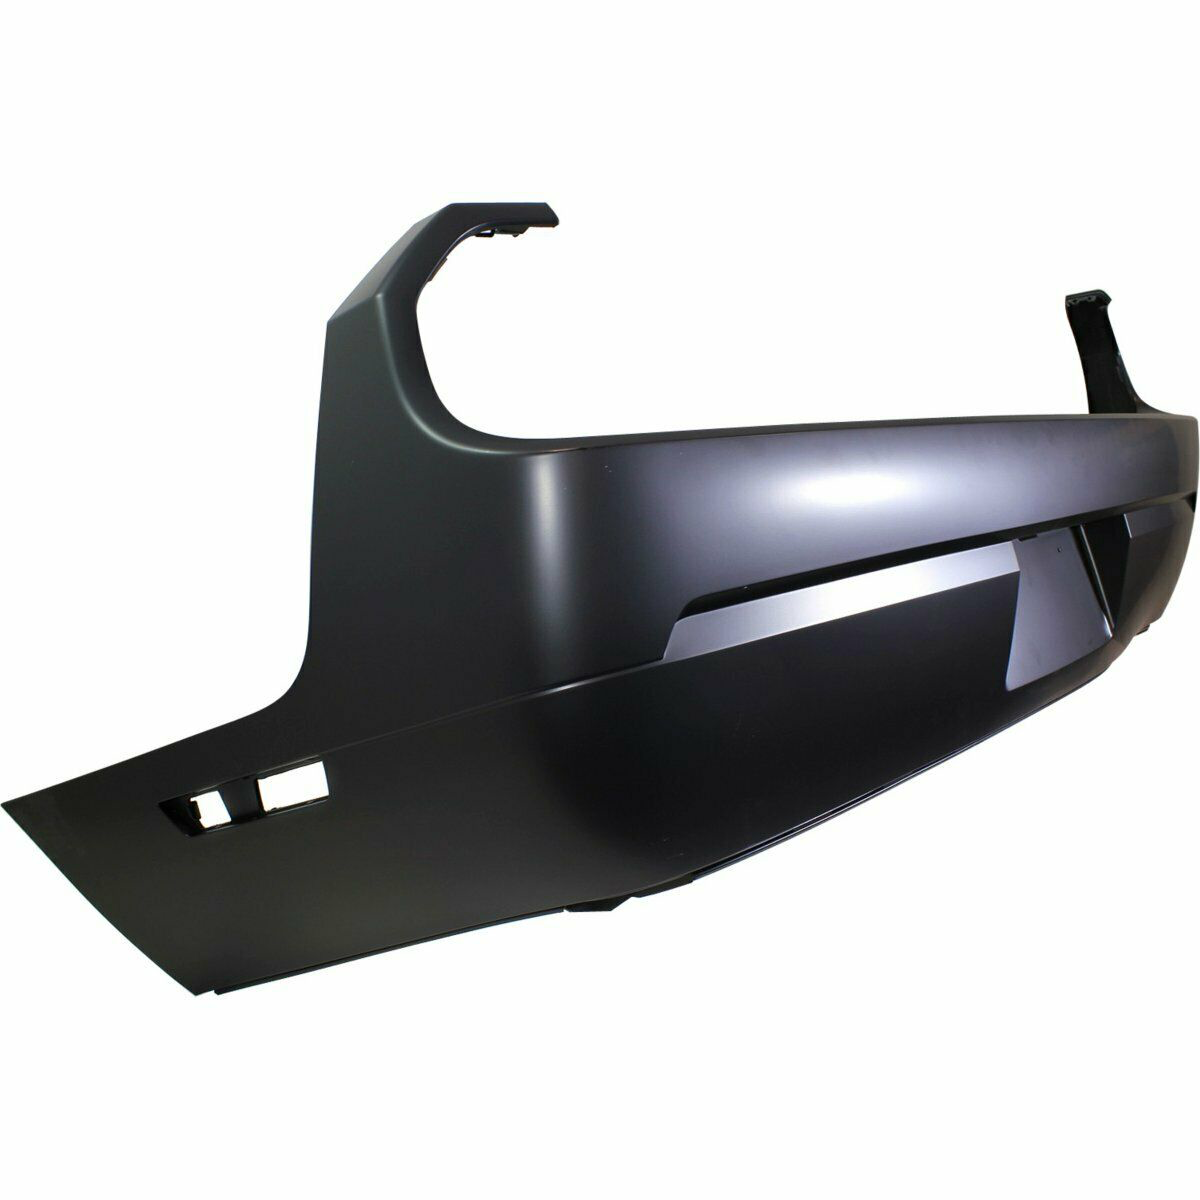 2008-2011 DODGE CHALLENGER Rear bumper w/o Snsrs Painted to Match